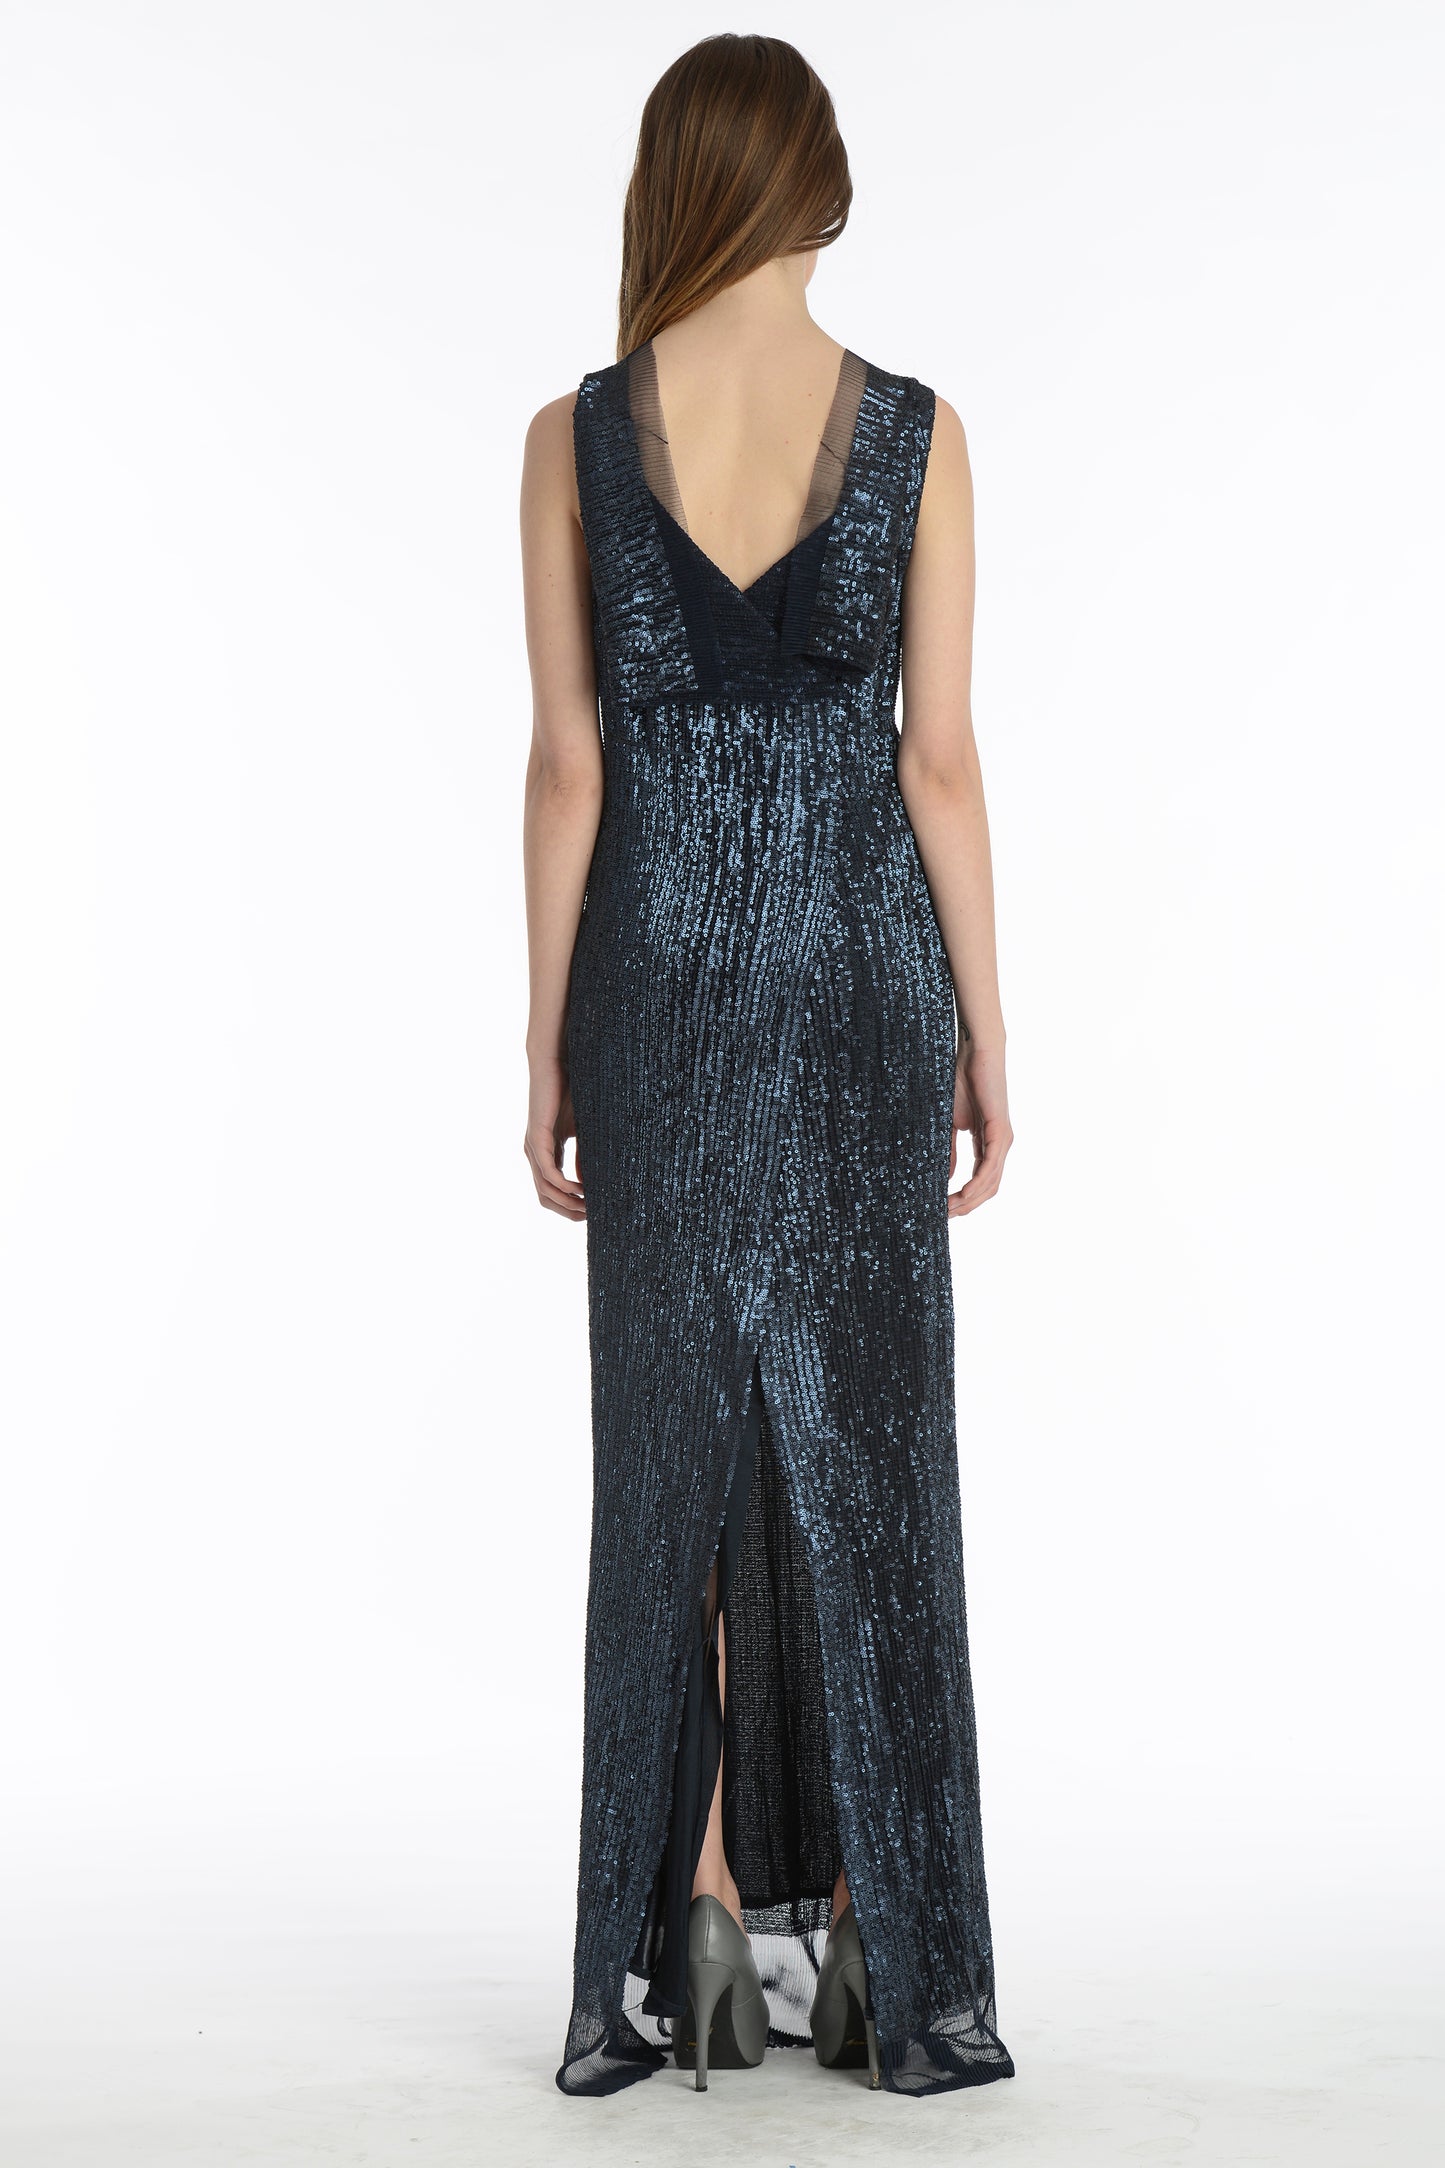 Slinky sequins bodycon cocktail gown